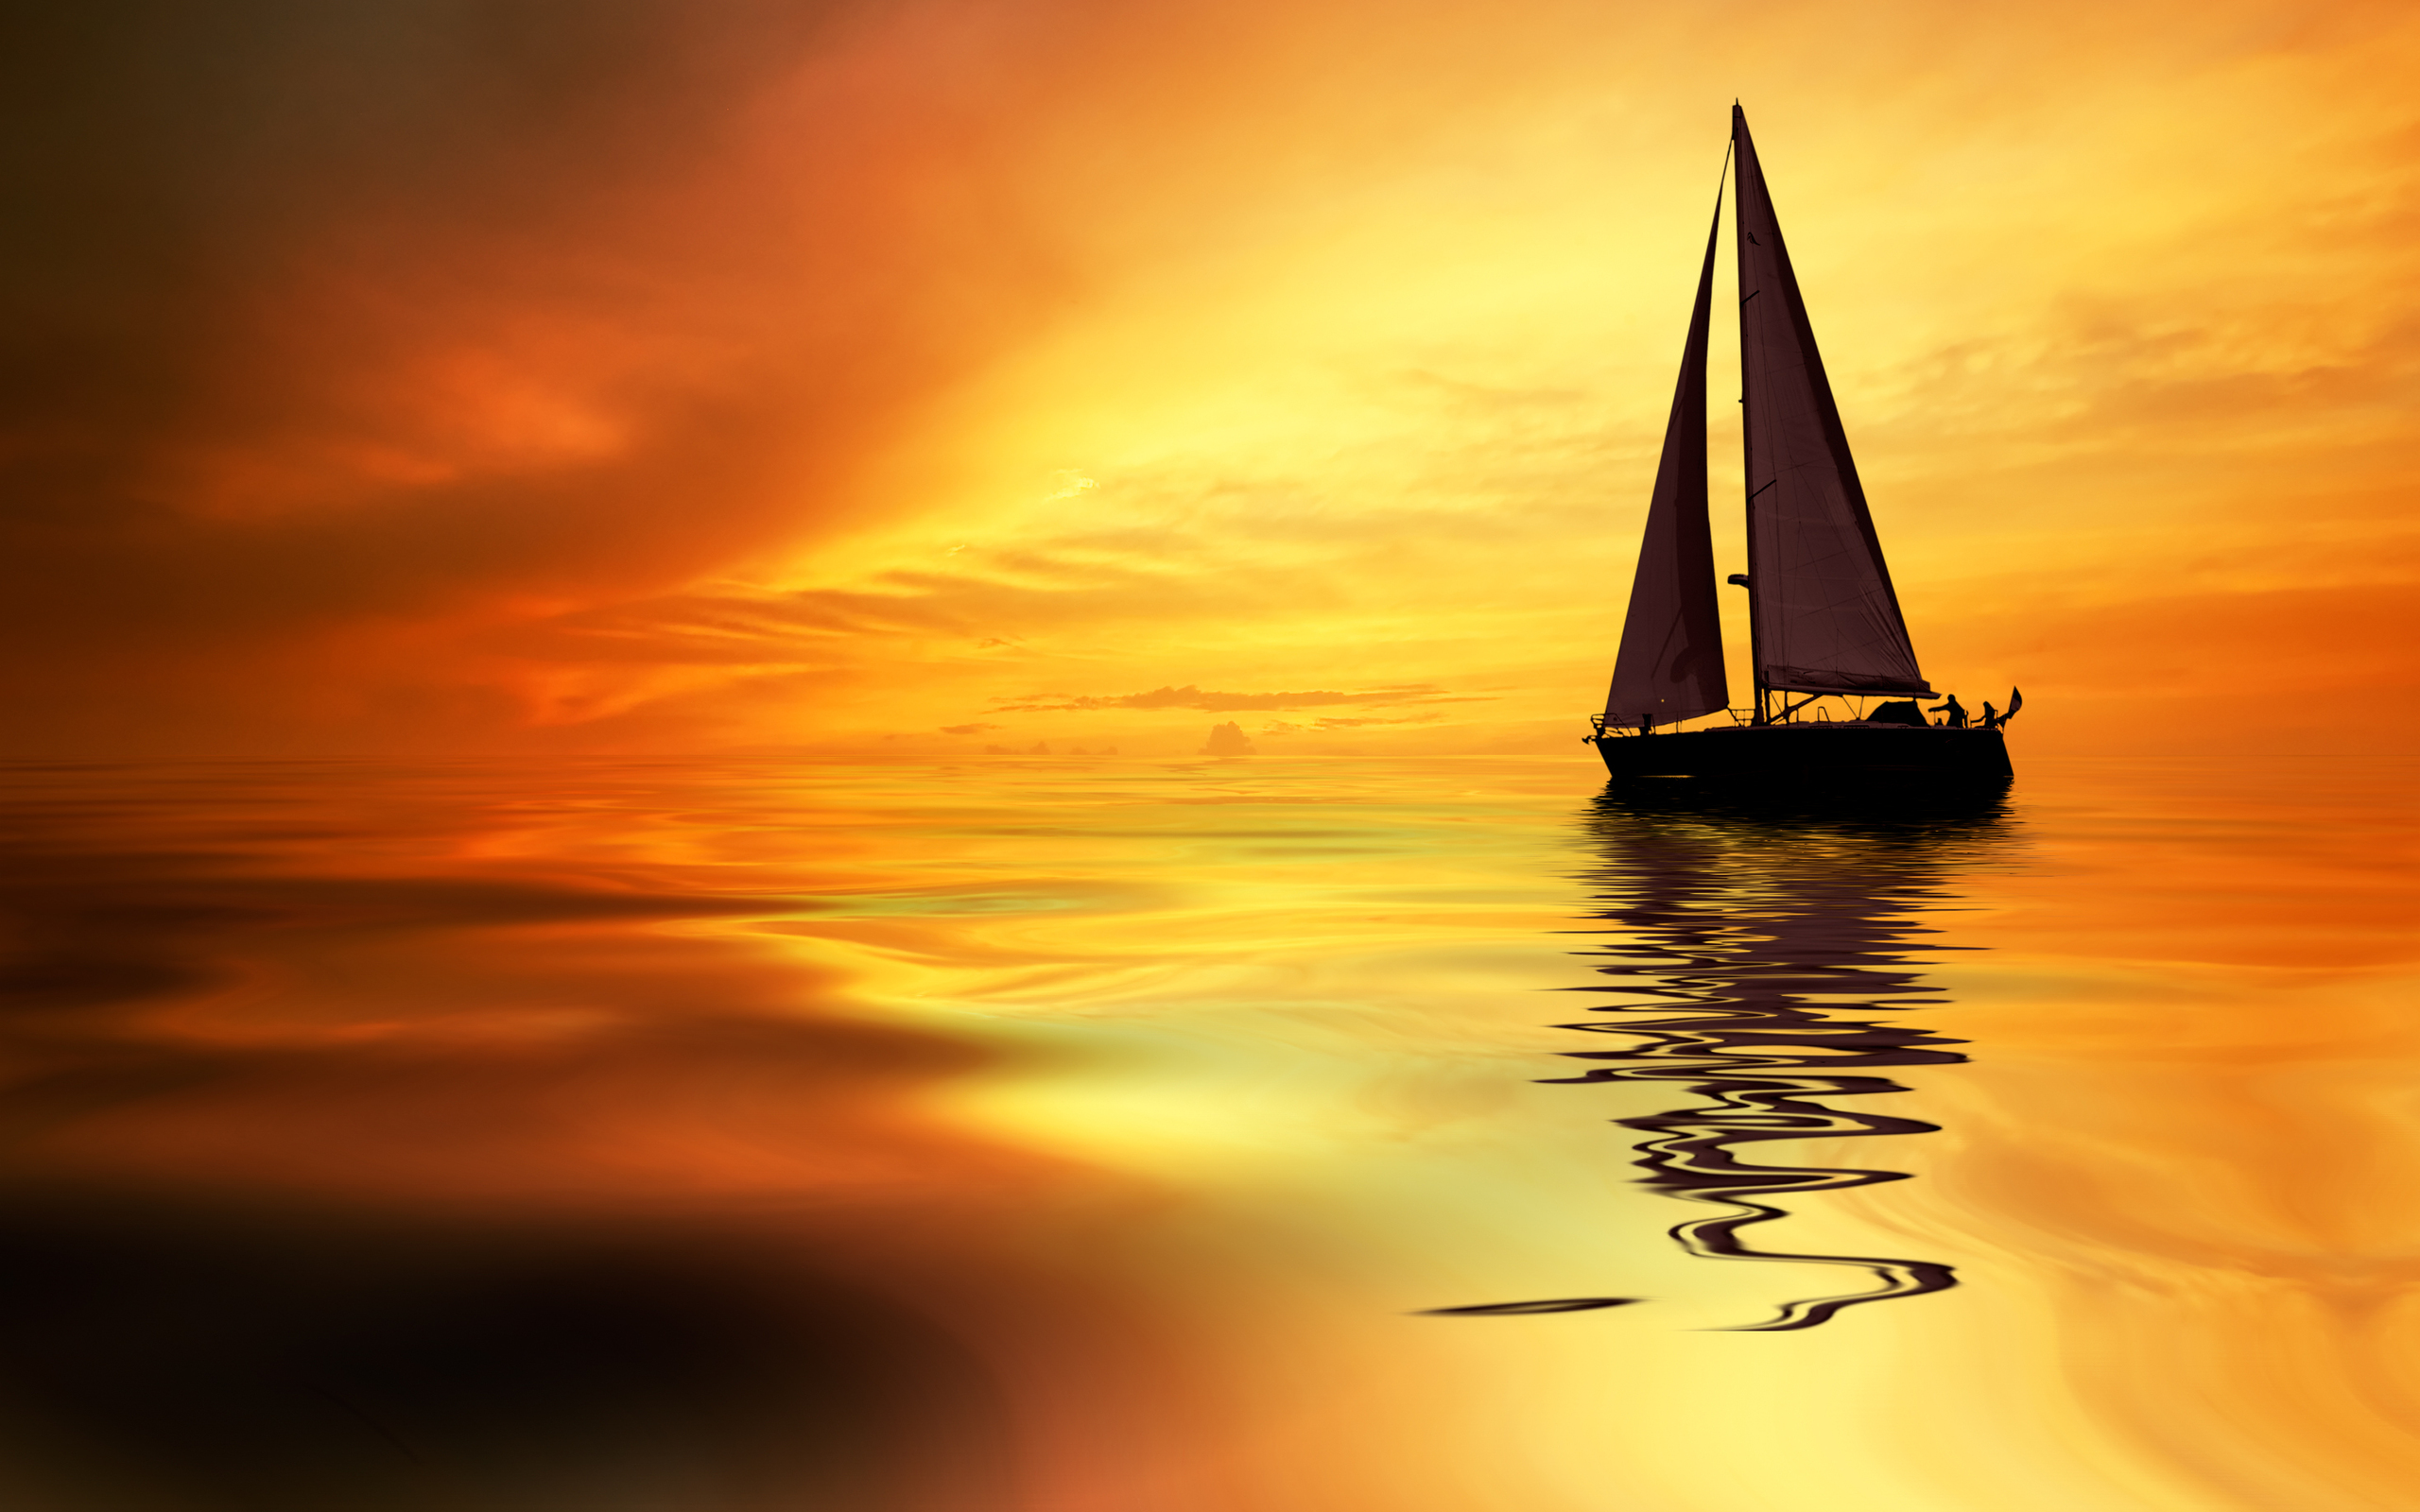 Sunset Boat On The Sea Wallpaper